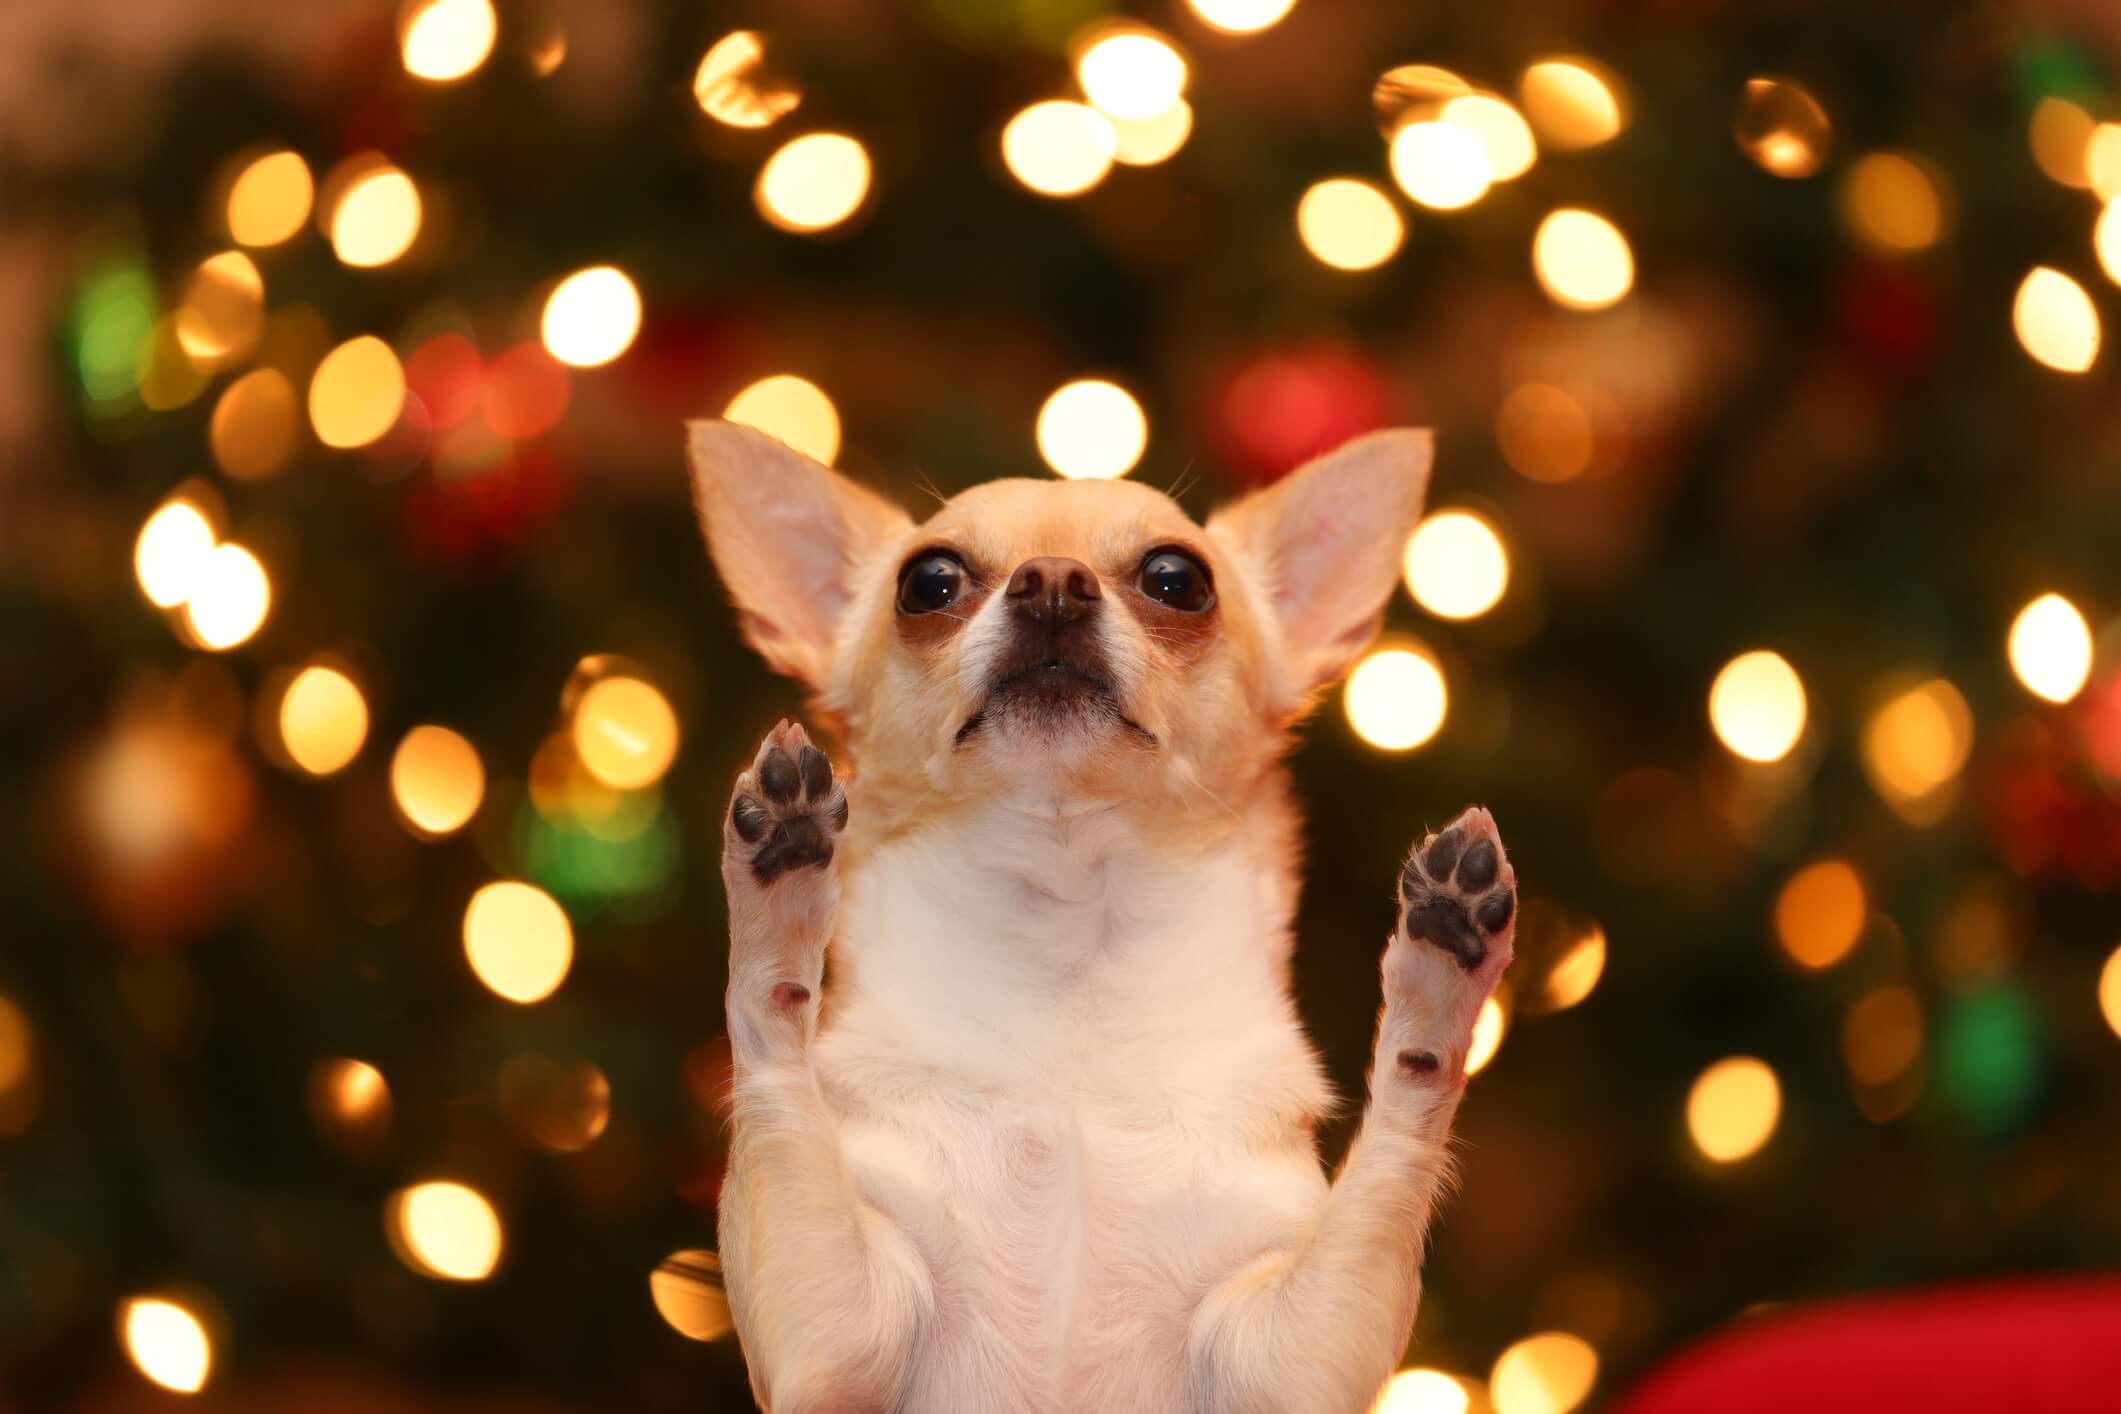 A chihuahua begs for a treat in front of holiday lights